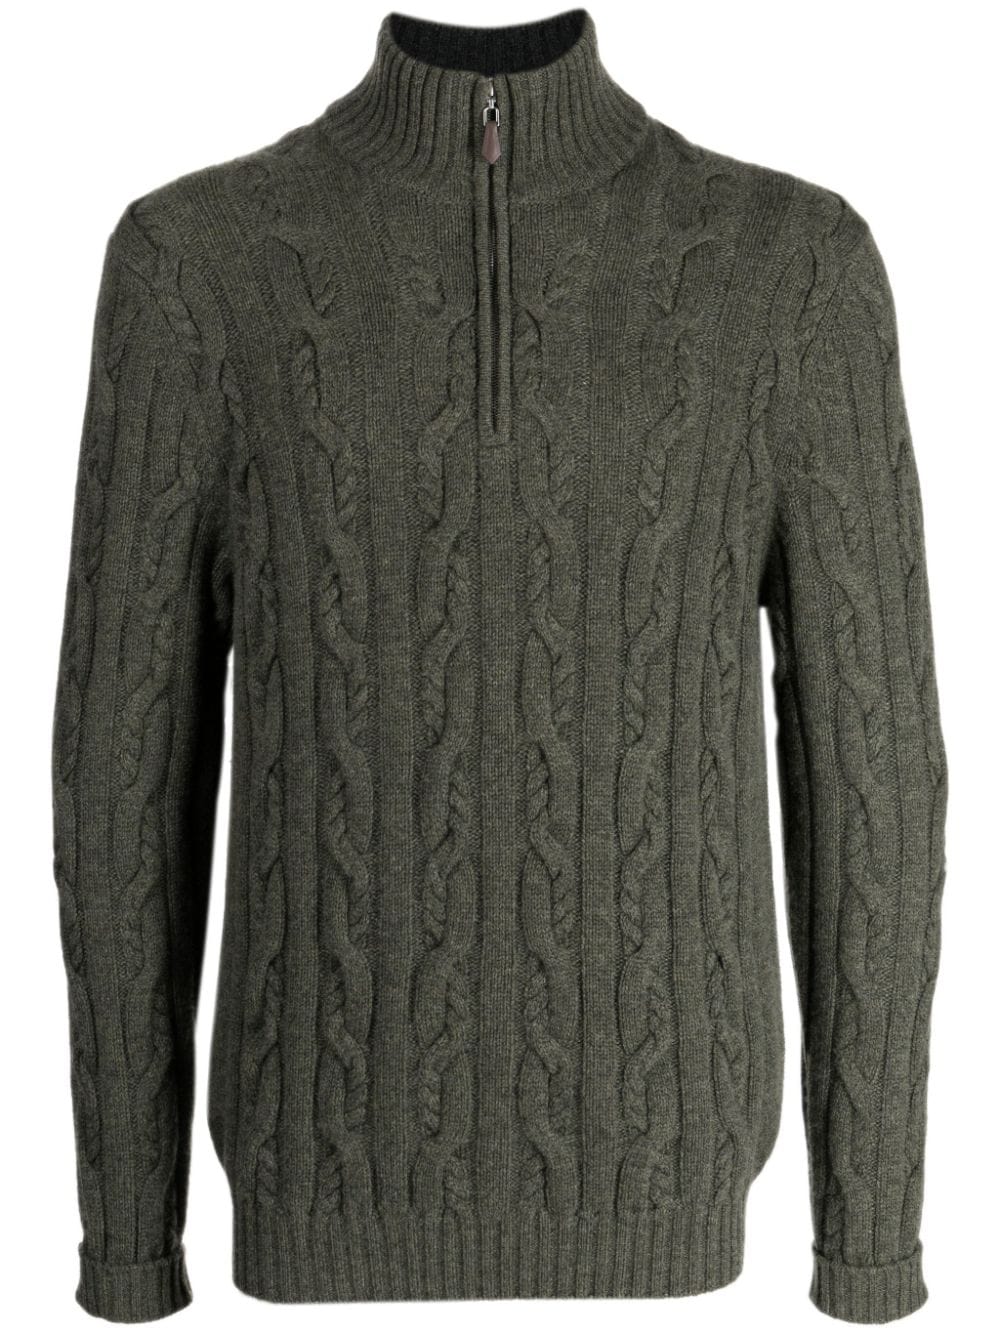 N.Peal cable-knit cashmere jumper - Green von N.Peal